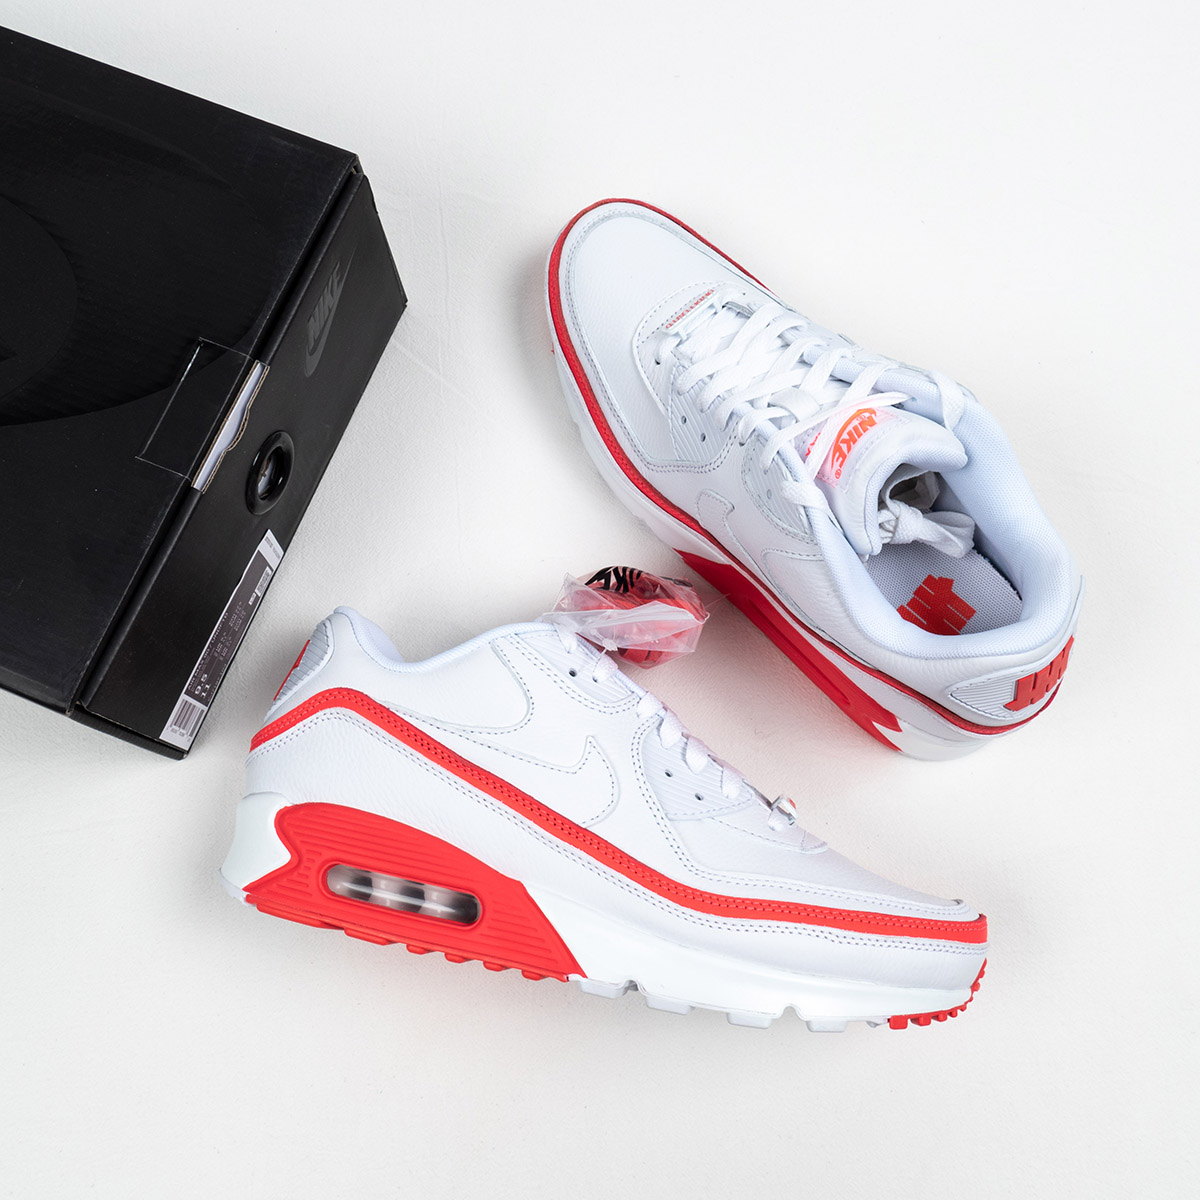 Undefeated x Nike Air Max 90 White/Solar Red Shoes